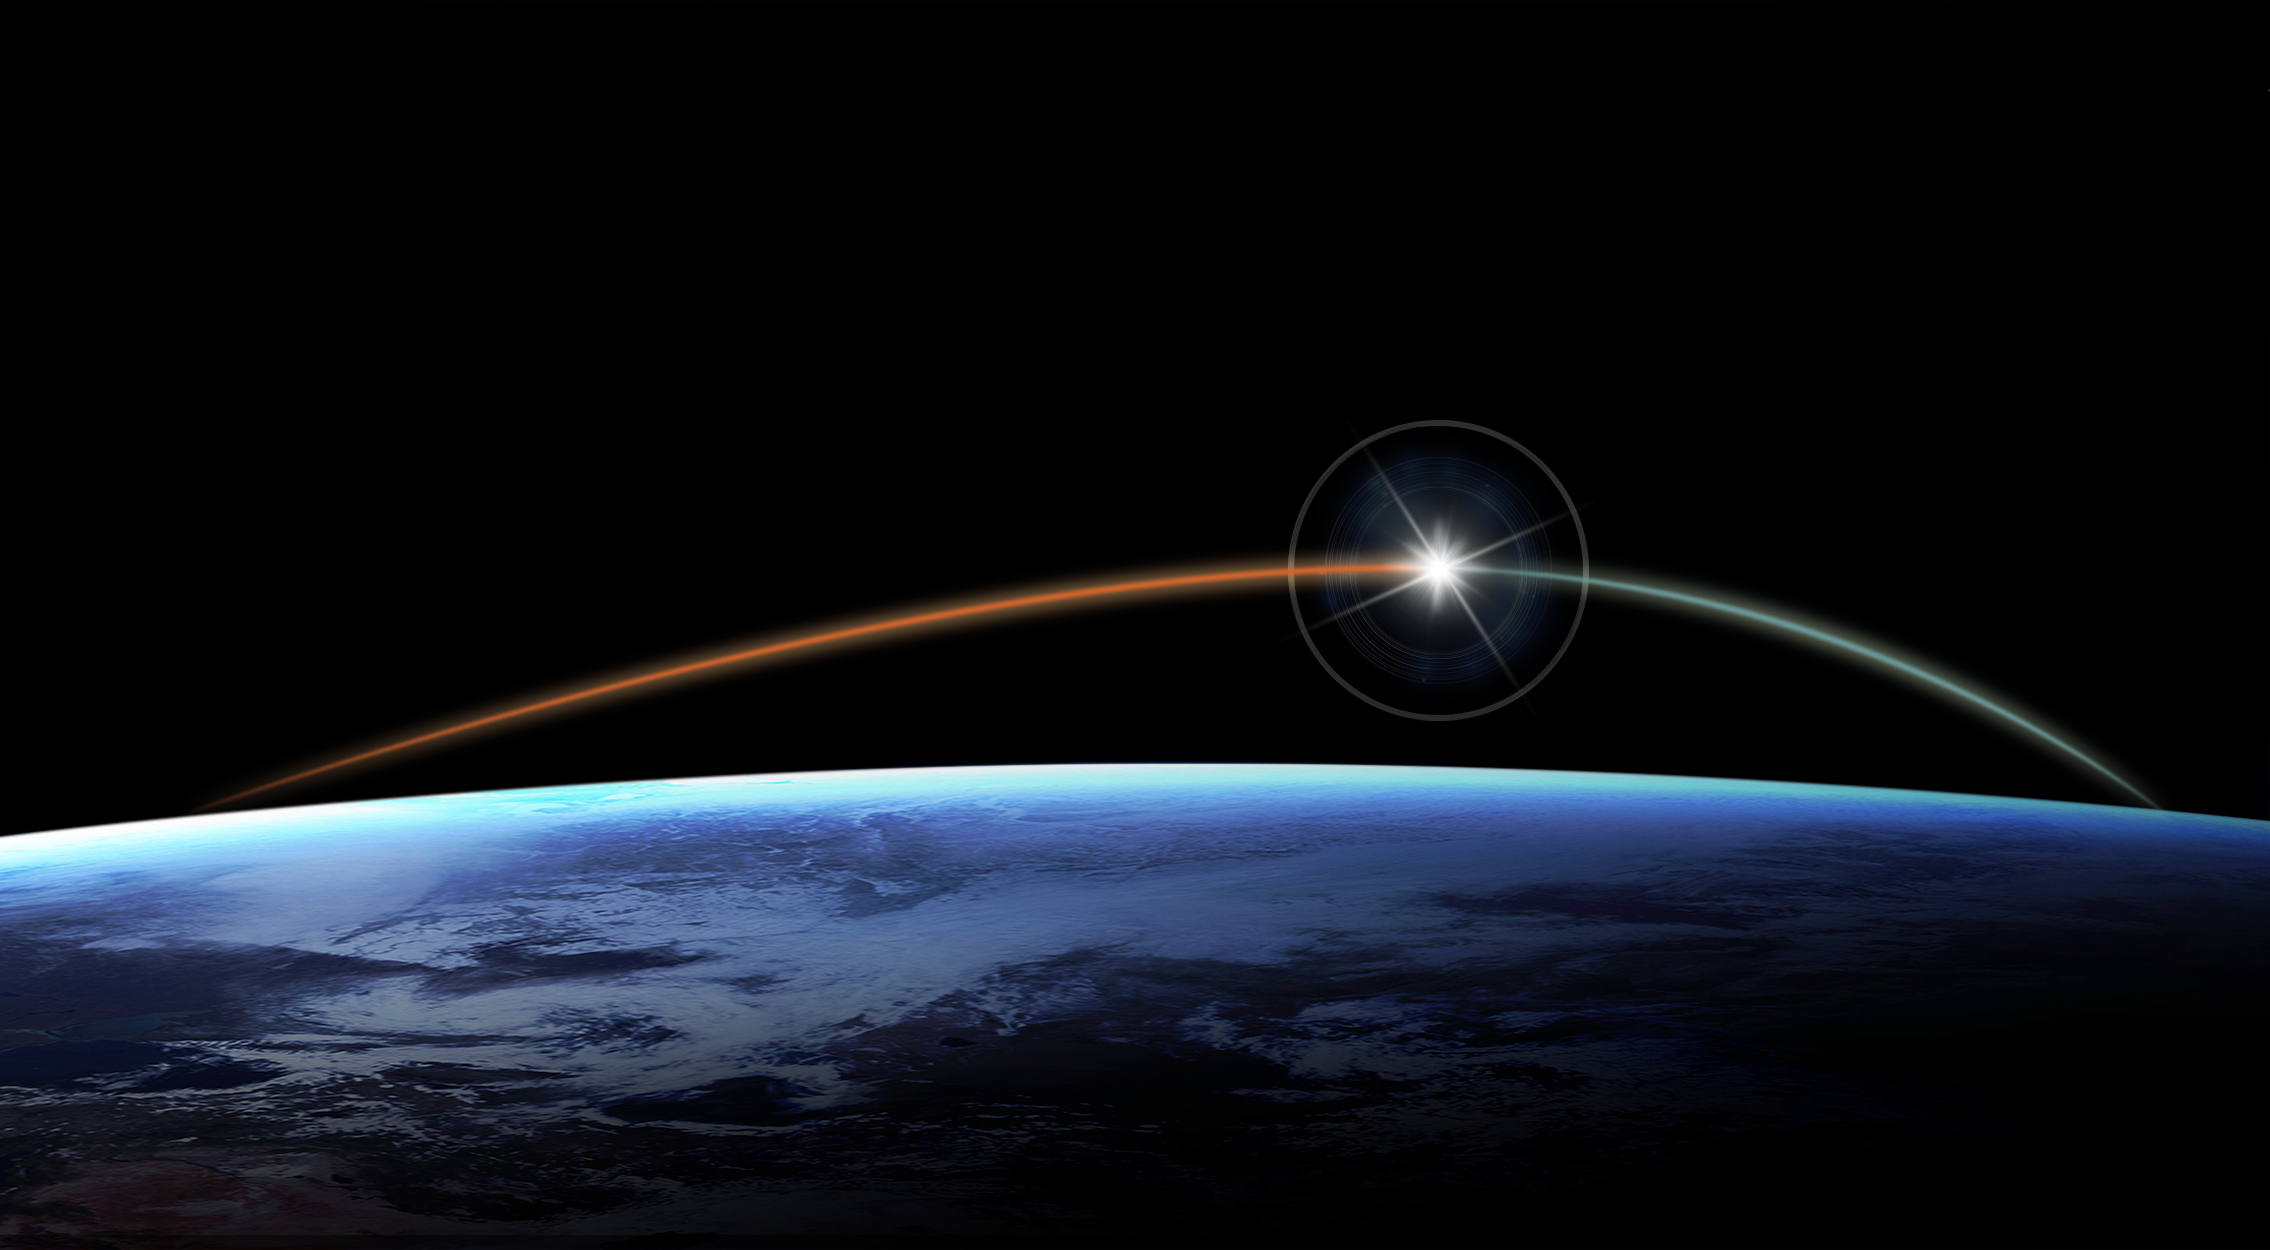 Twilit sky in space with a bright star and streak arching over Earth’s atmosphere